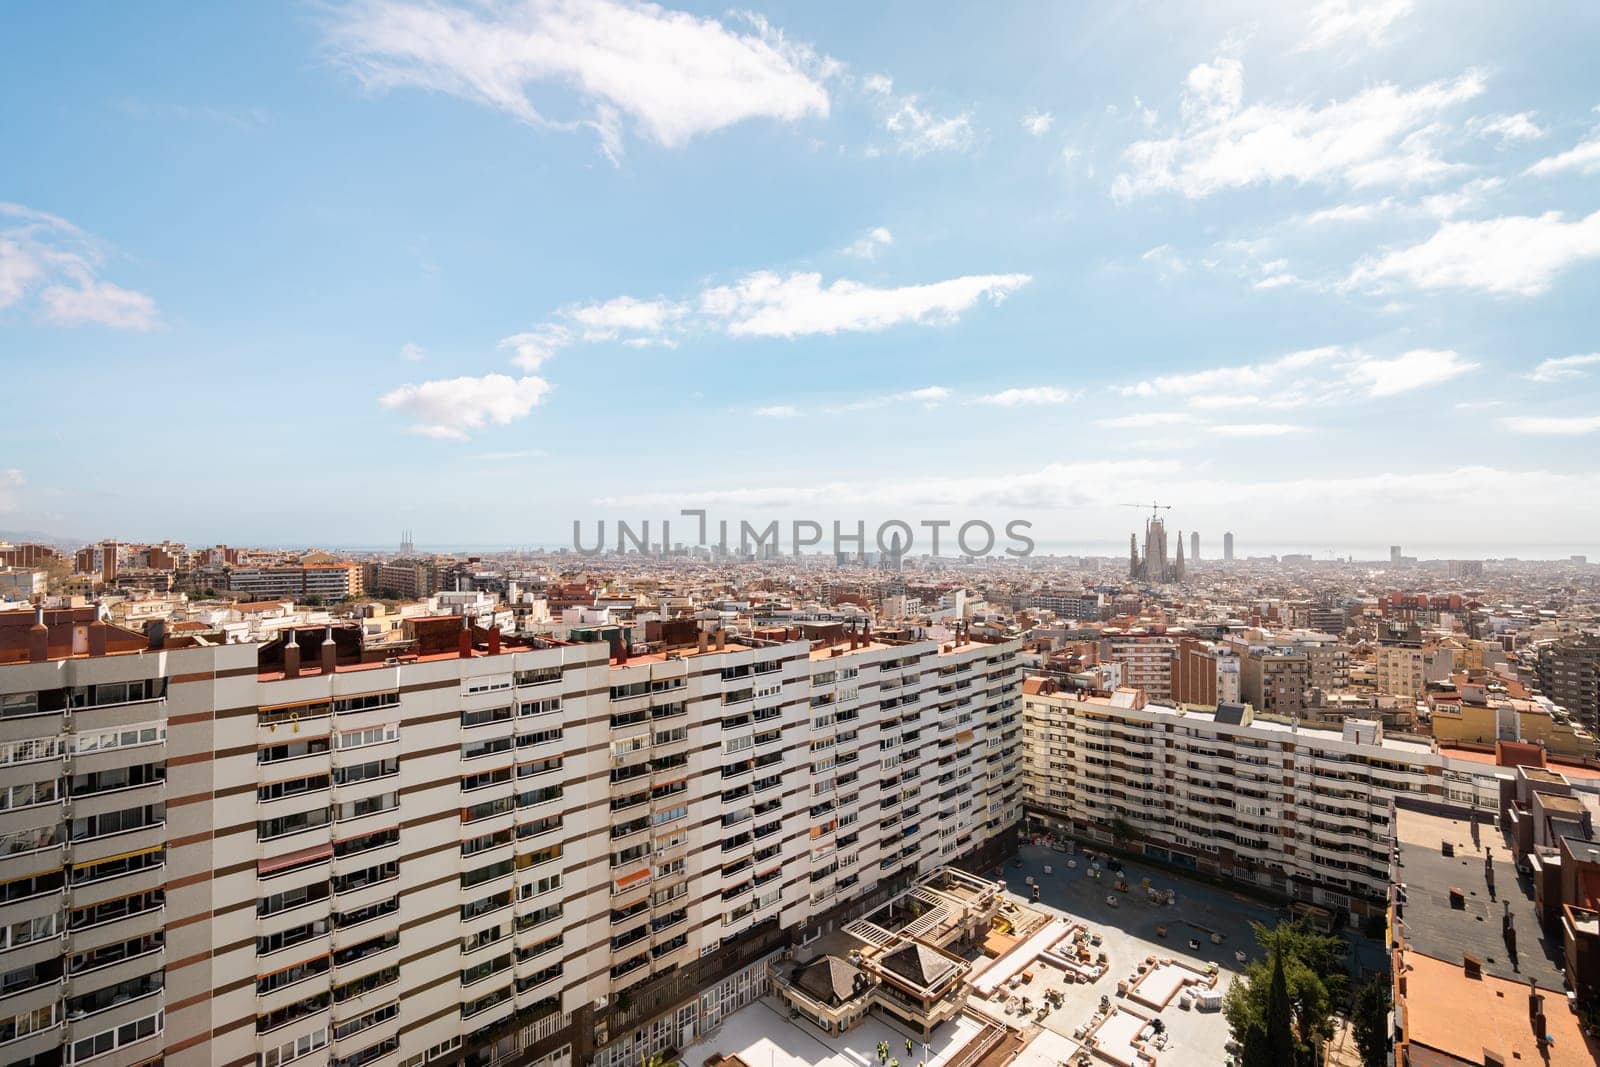 A captivating Barcelona cityscape showcases stunning architecture against a clear sky, creating a vibrant urban scene.